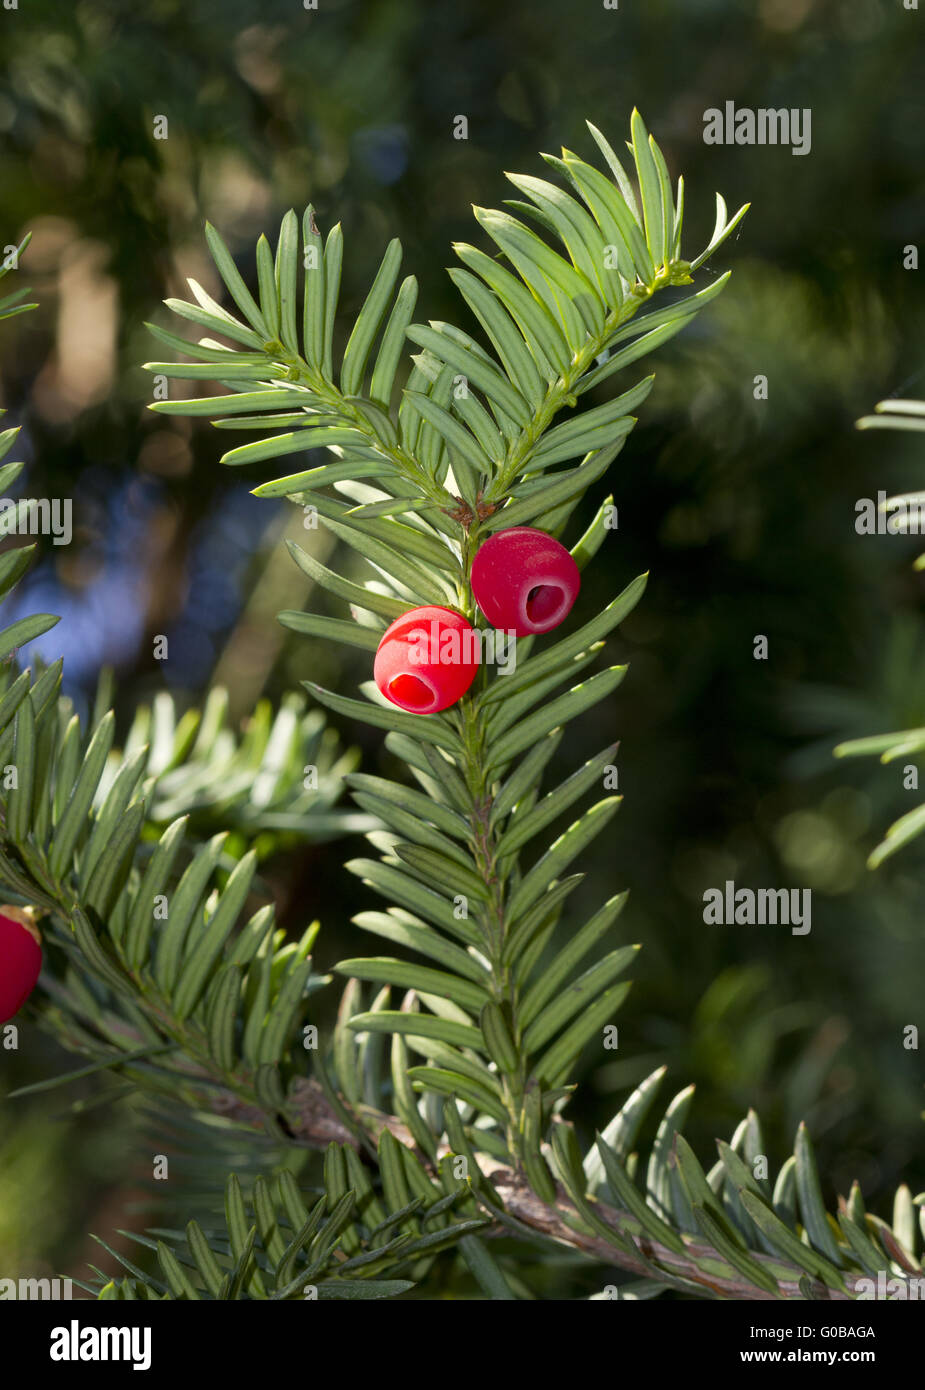 Sprig of yew (Taxus baccata) with red berries. Stock Photo